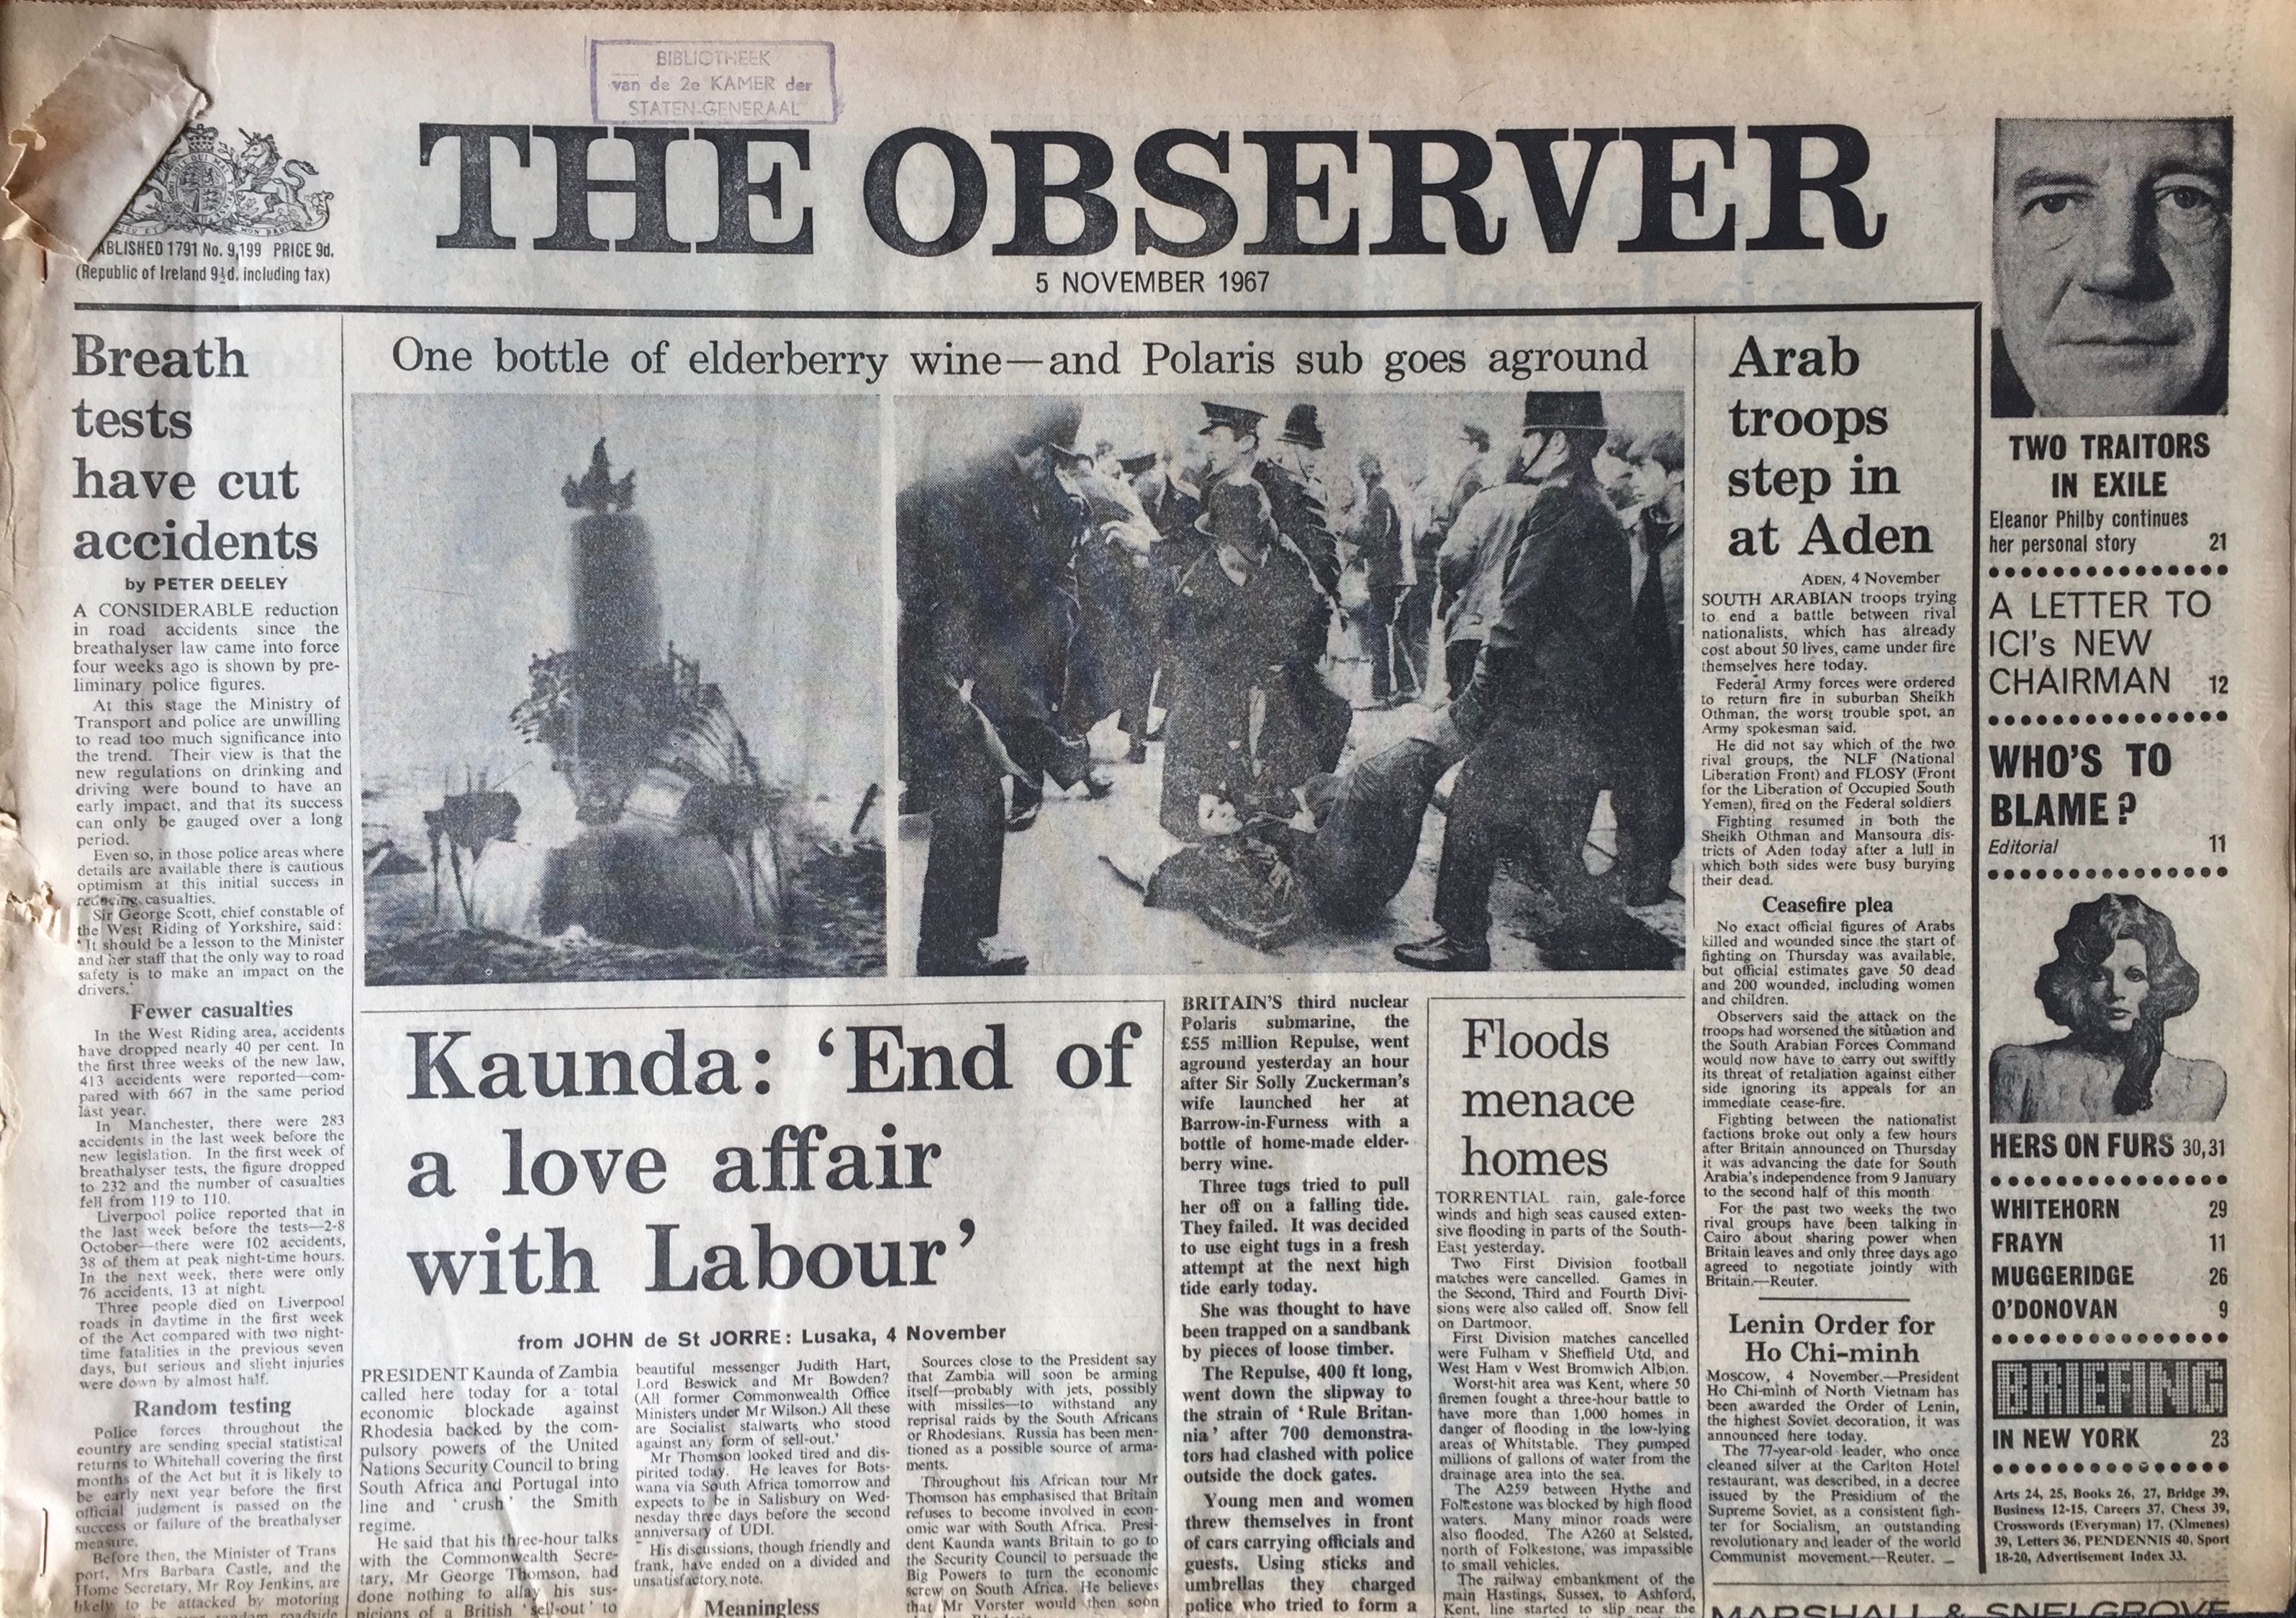 The Observer (06-08-1972)